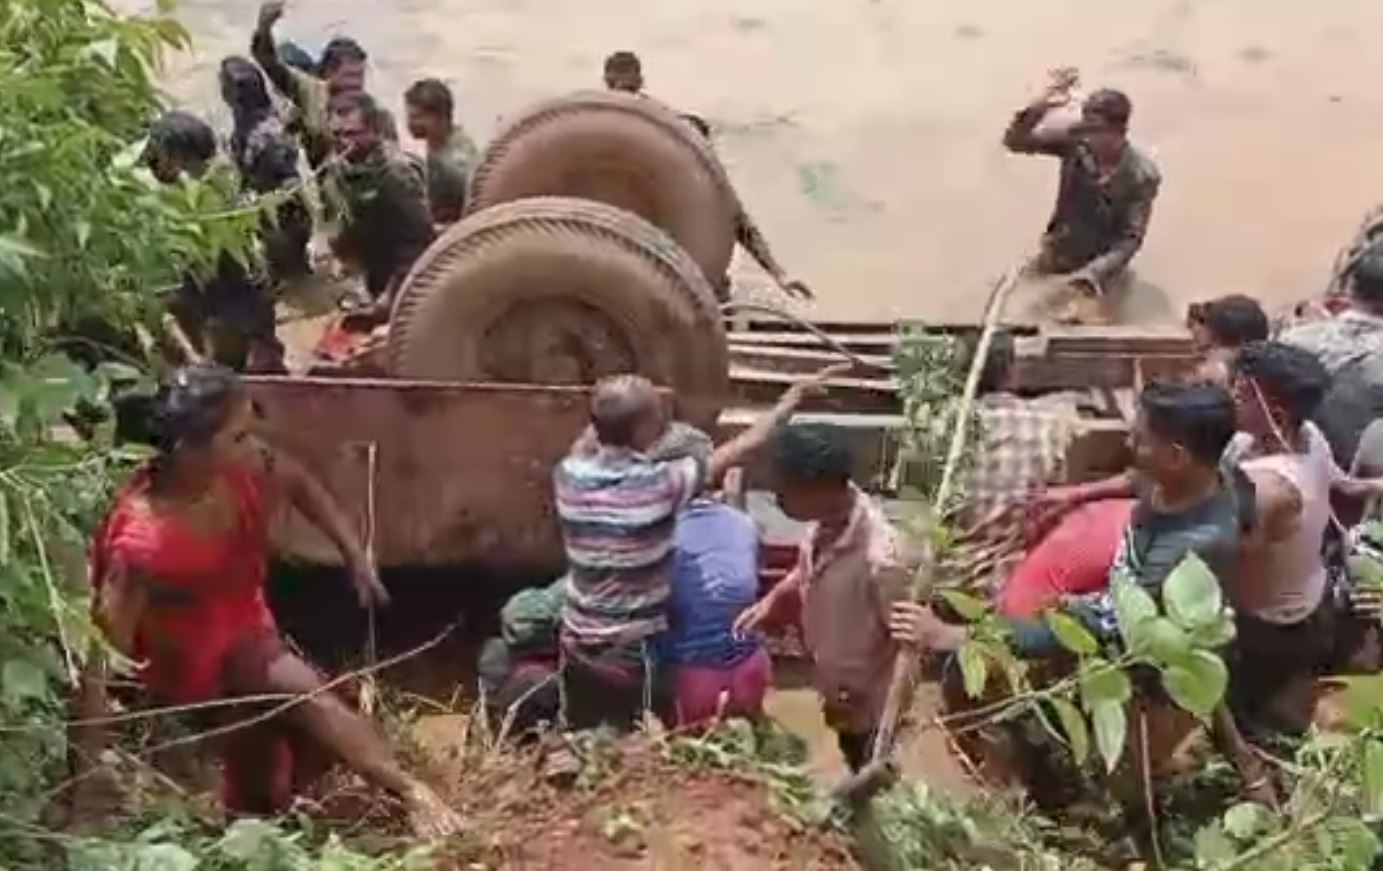 tractor overturned